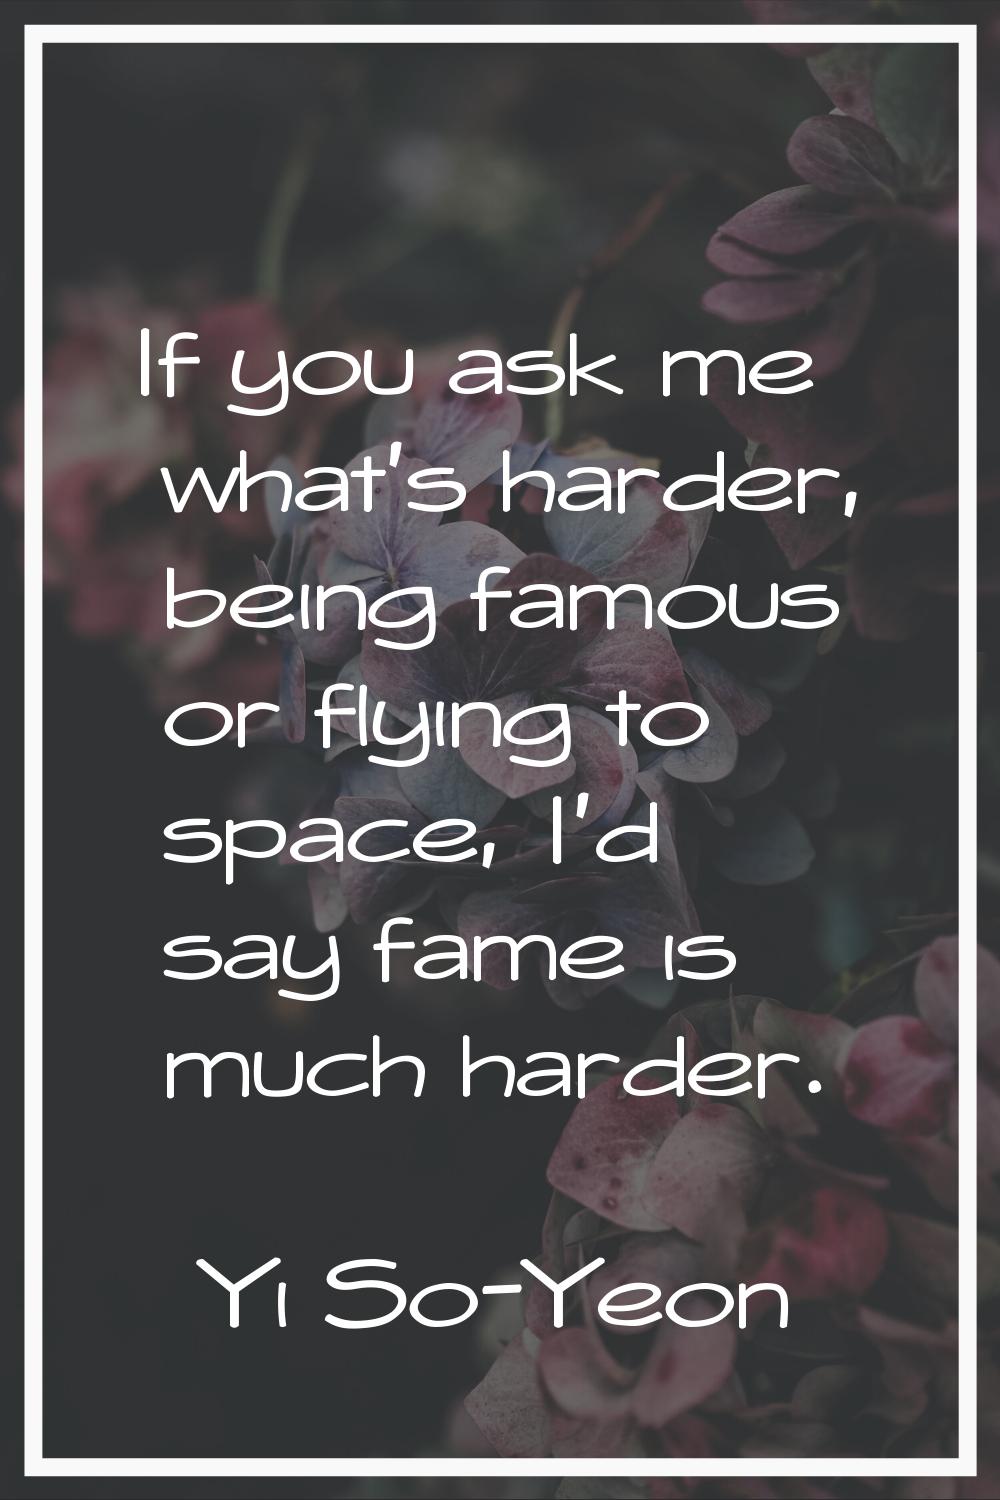 If you ask me what's harder, being famous or flying to space, I'd say fame is much harder.